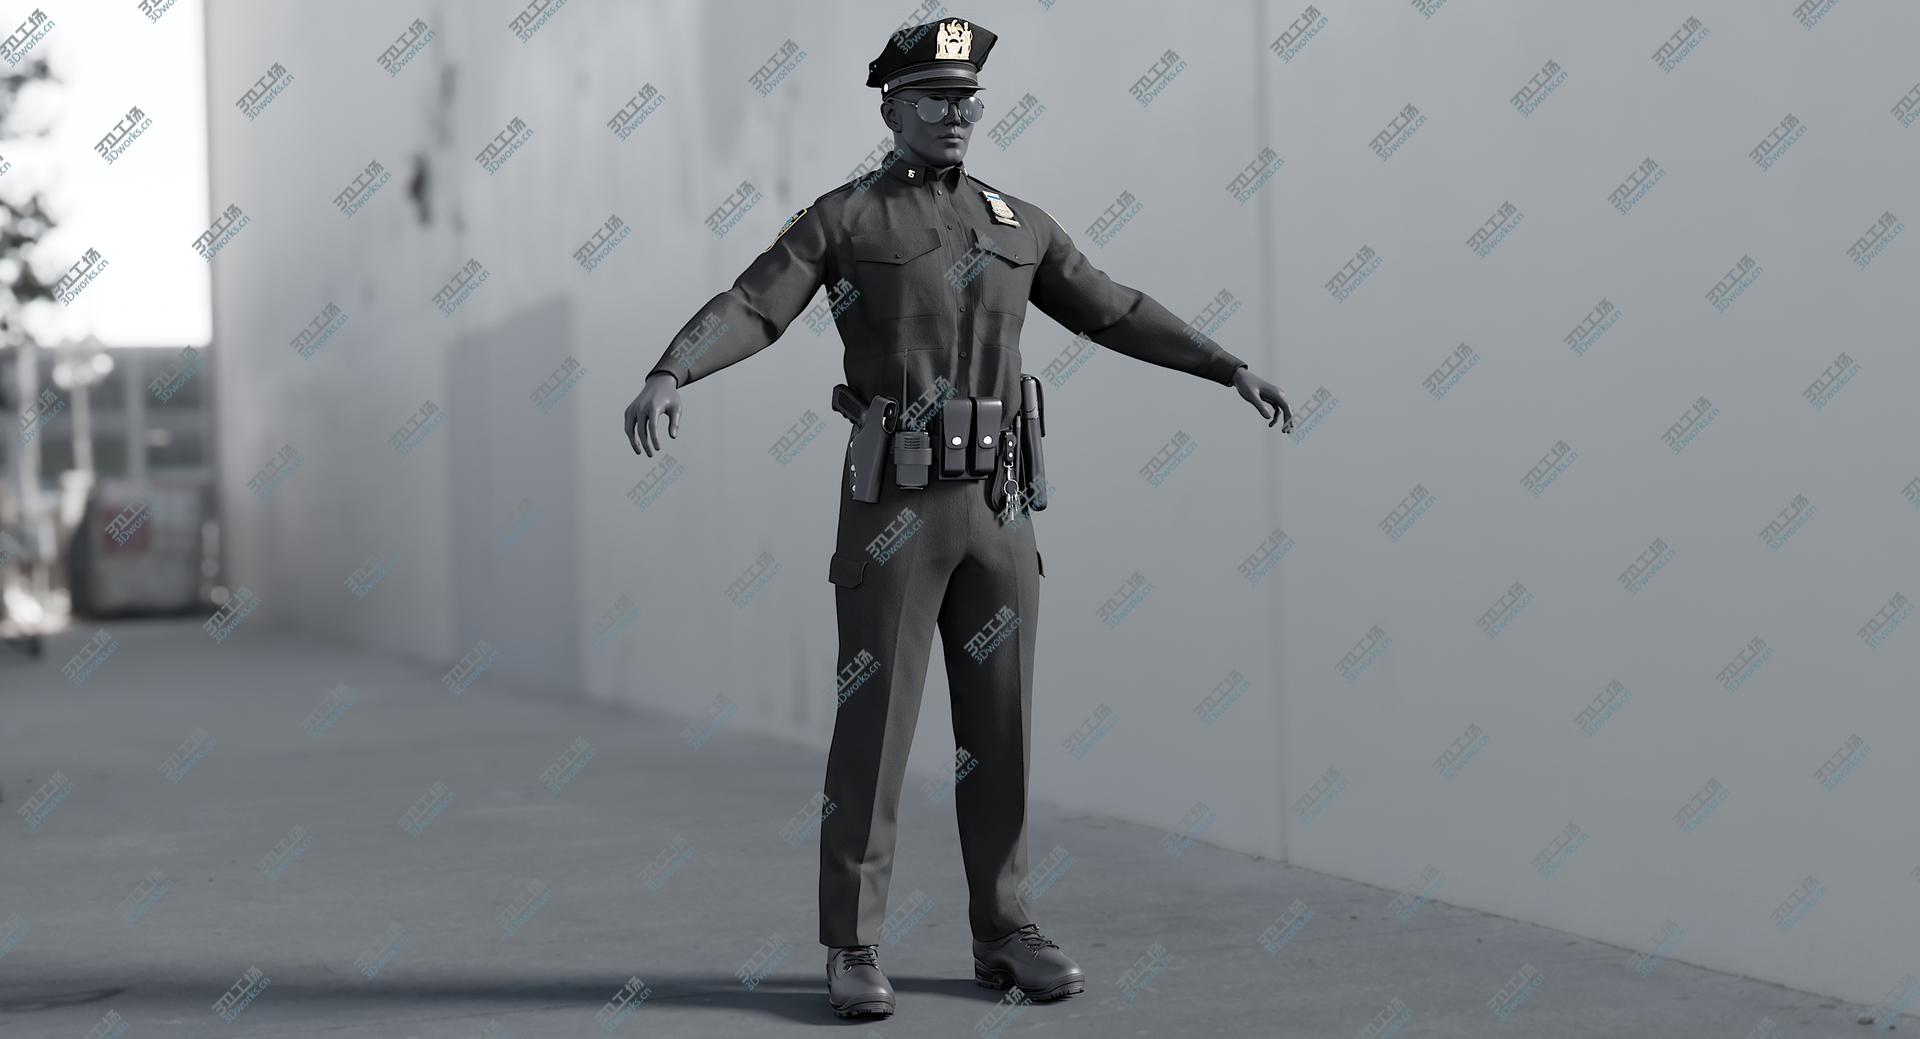 images/goods_img/20210113/3D Military SWAT Police Terrorist Uniform Collection model/5.jpg